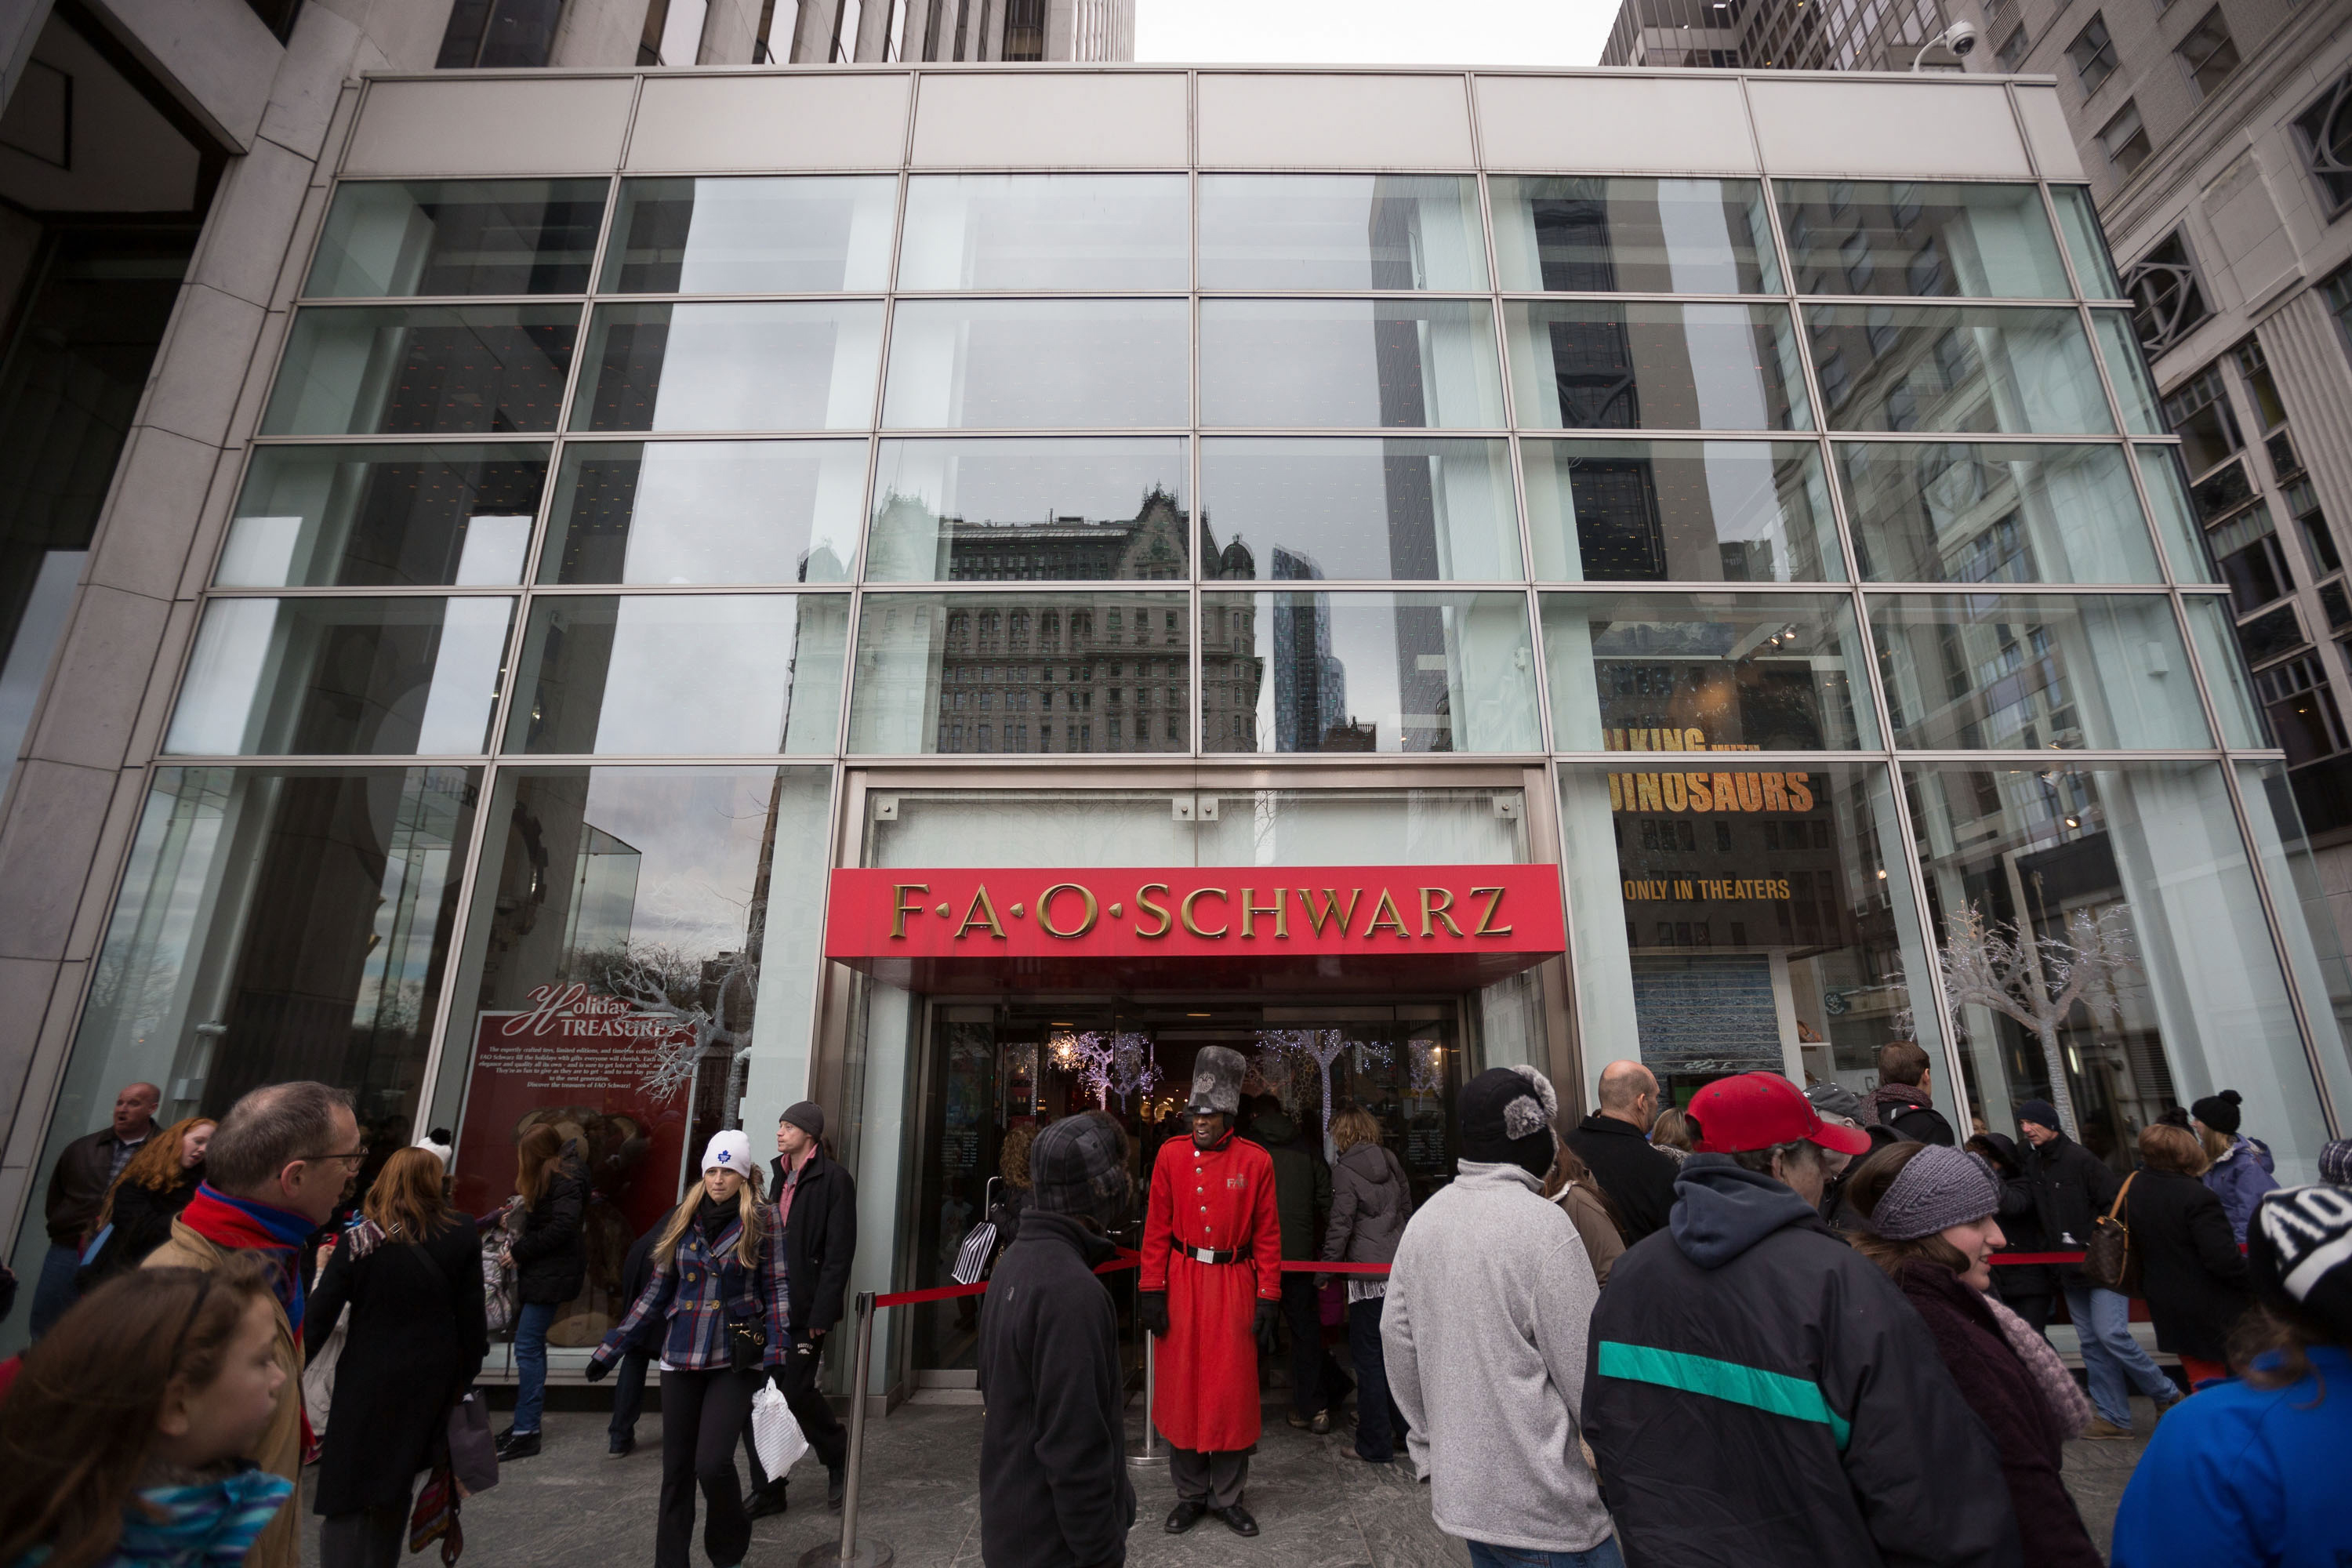 A general view of the exterior facade of FAO Schwarz flagship Toy store in the General Motors Building at Fifth Avenue and 58th Street on December 30, 2013 in New York City. (Ben Hider—Getty Images)